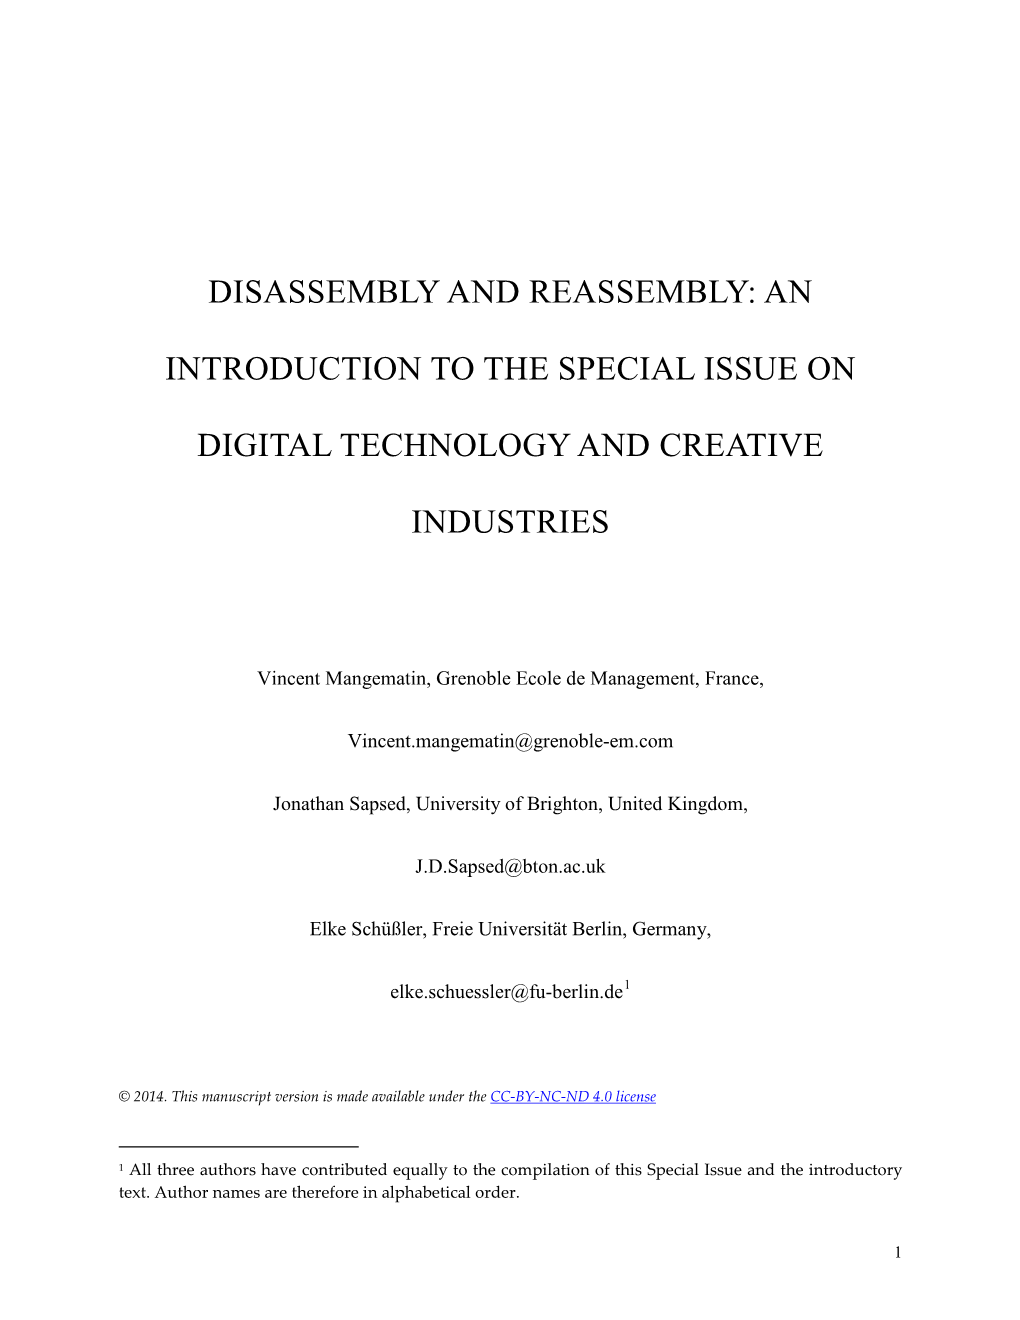 Disassembly and Reassembly: an Introduction to the Special Issue on Digital Technology and Creative Industries